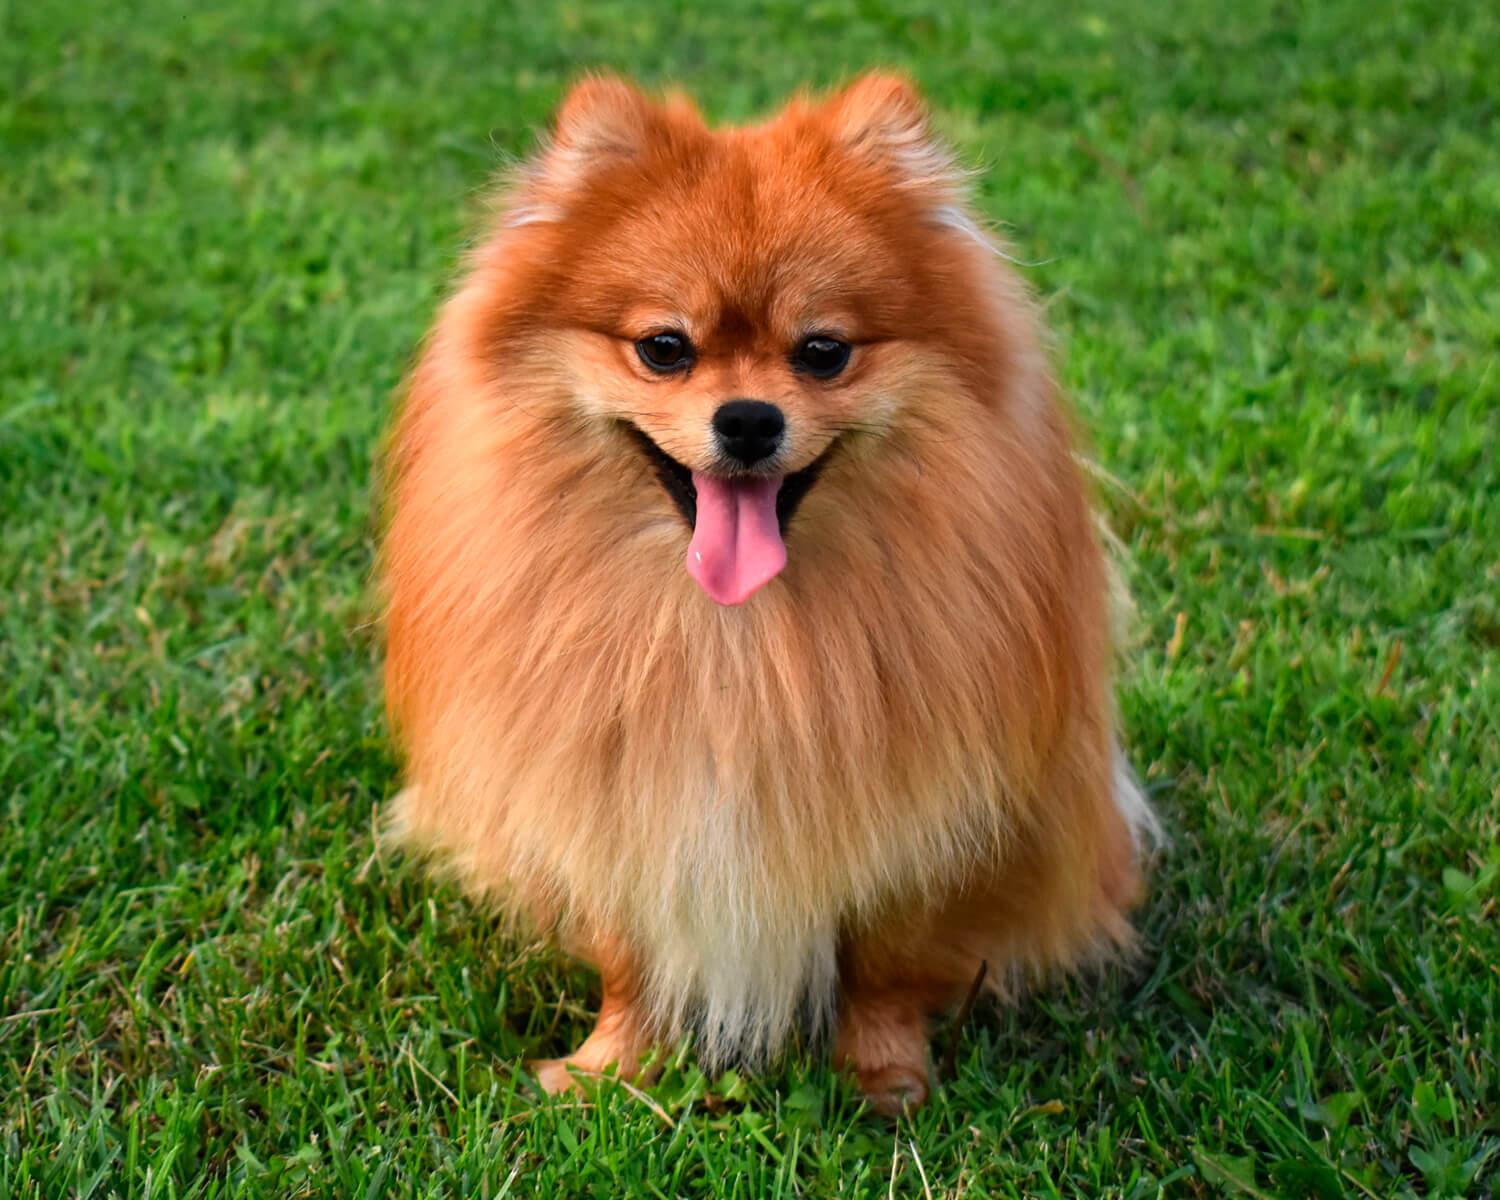 Offered for sale Super boy, in bear type, Pomeranian Spitz. At the time of sale will have a full pac